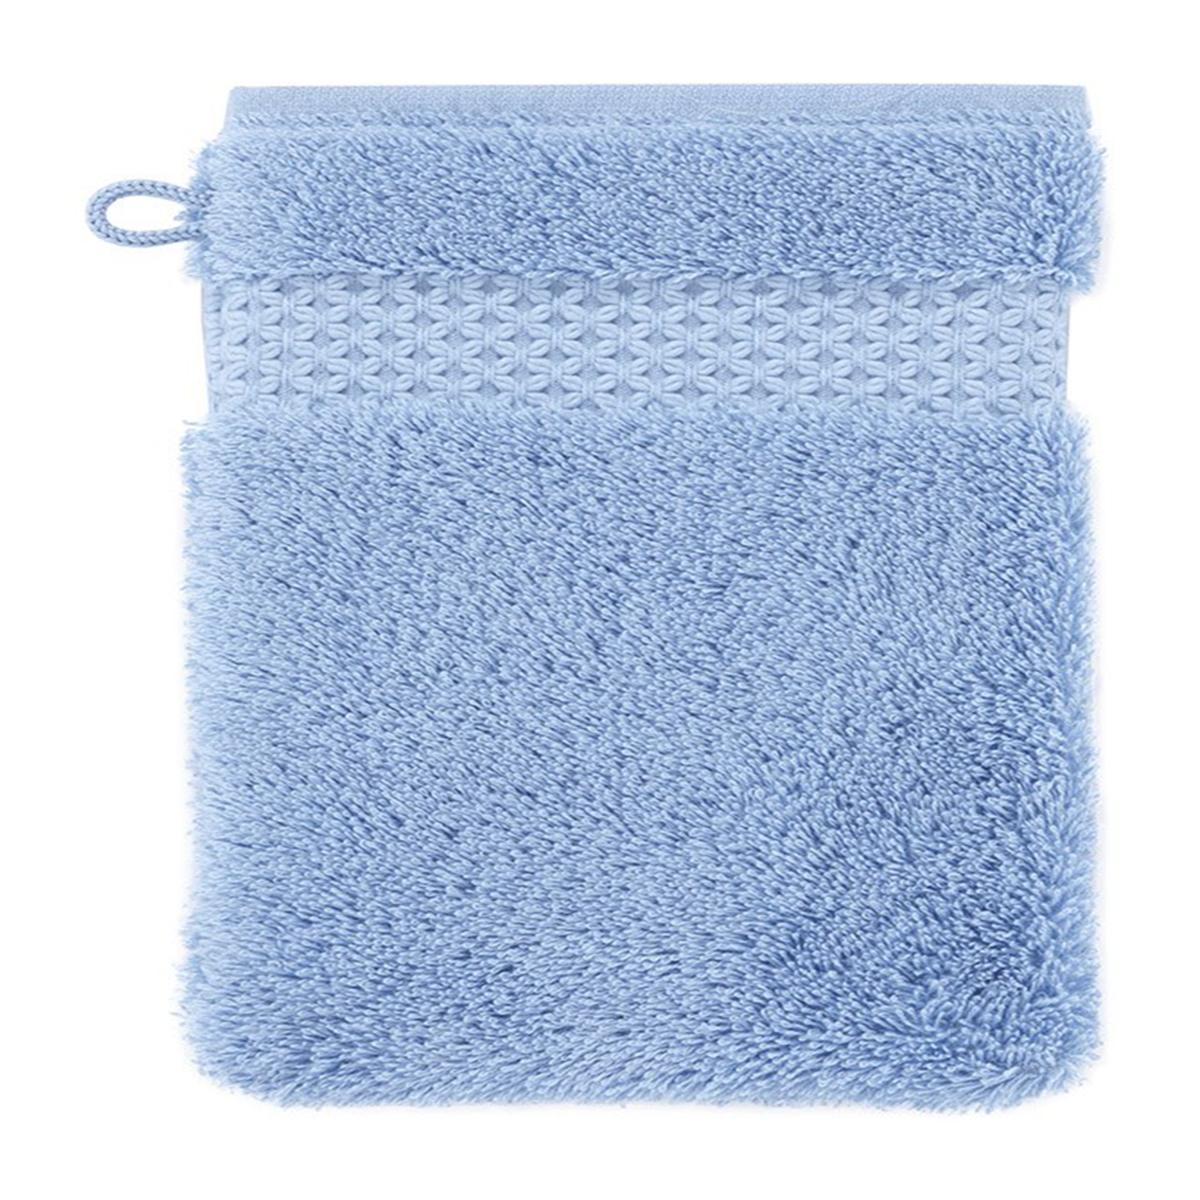 Bath Mitt of Yves Delorme Etoile Bath Towels and Mats in Azure Color